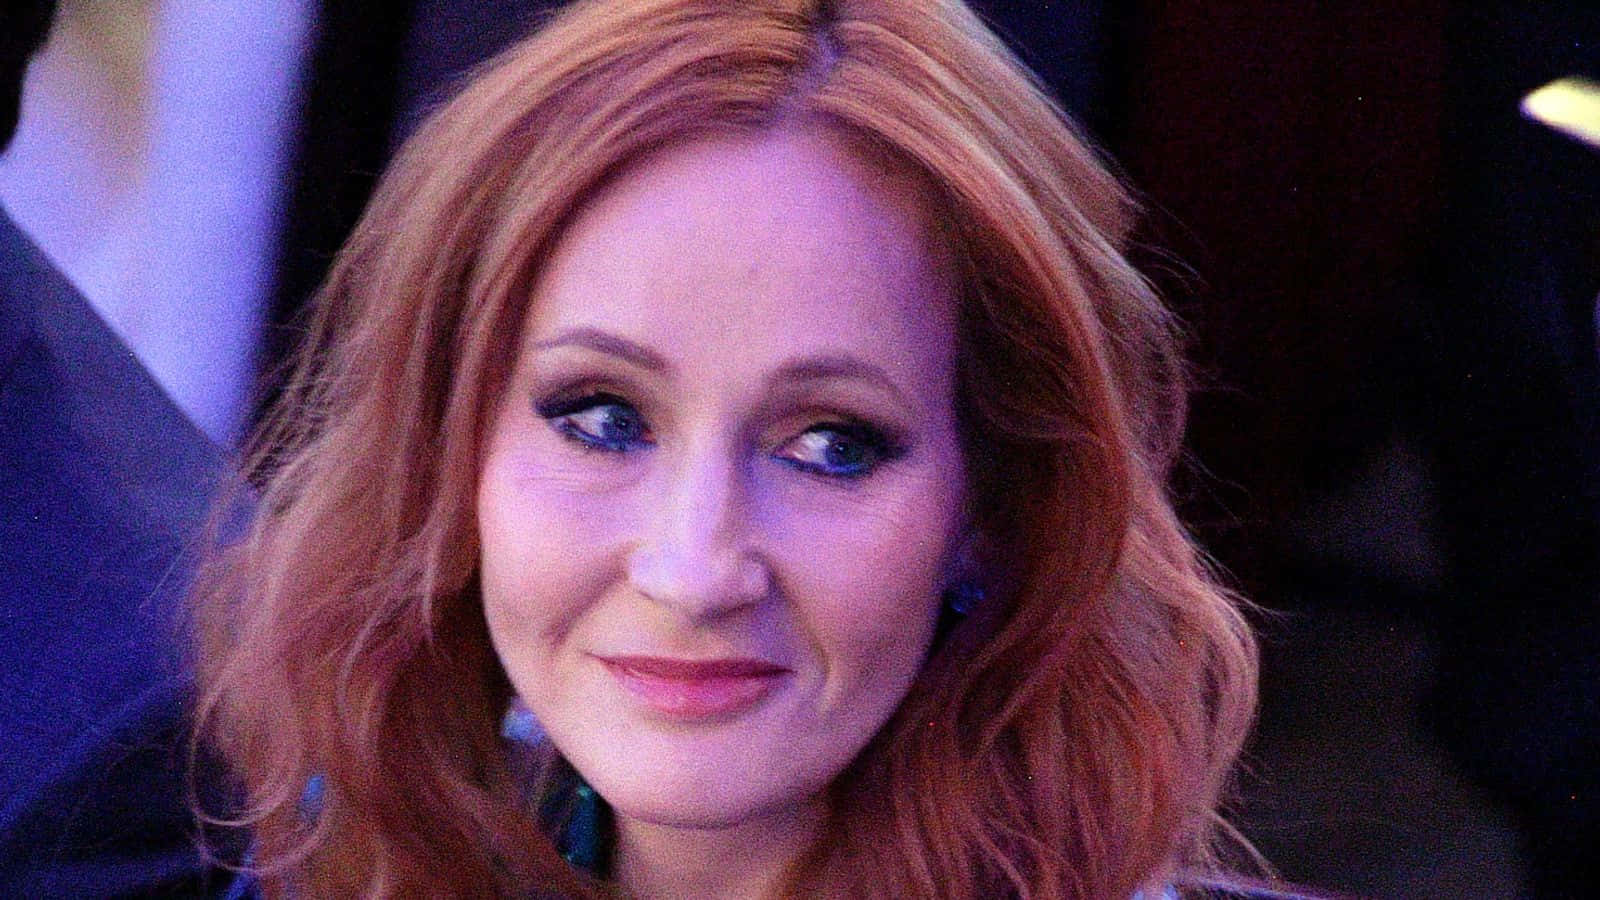 J.K. Rowling Smiling During an Interview Wallpaper